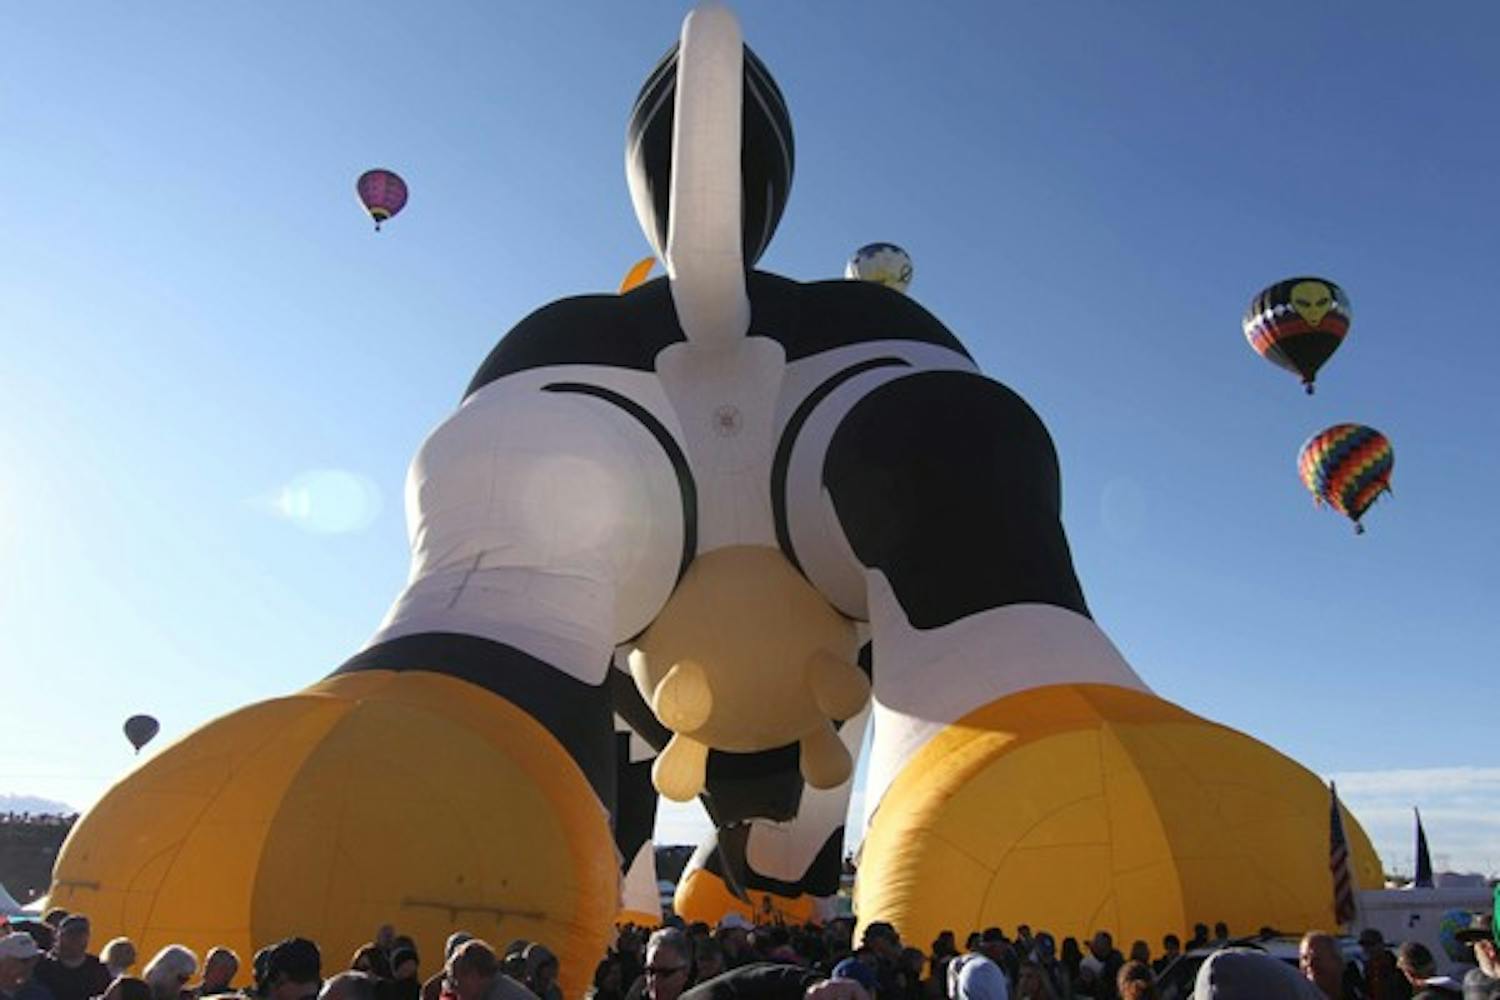 COW BUM: Arabelle the Creamland Cow towers over the crowd at the Albuquerque International Ballon Fiesta in New Mexico on Saturday.  Arabelle is one of the largest special shape balloons at eighty feet tall and 120 feet long. (Photo by Lisa Bartoli)